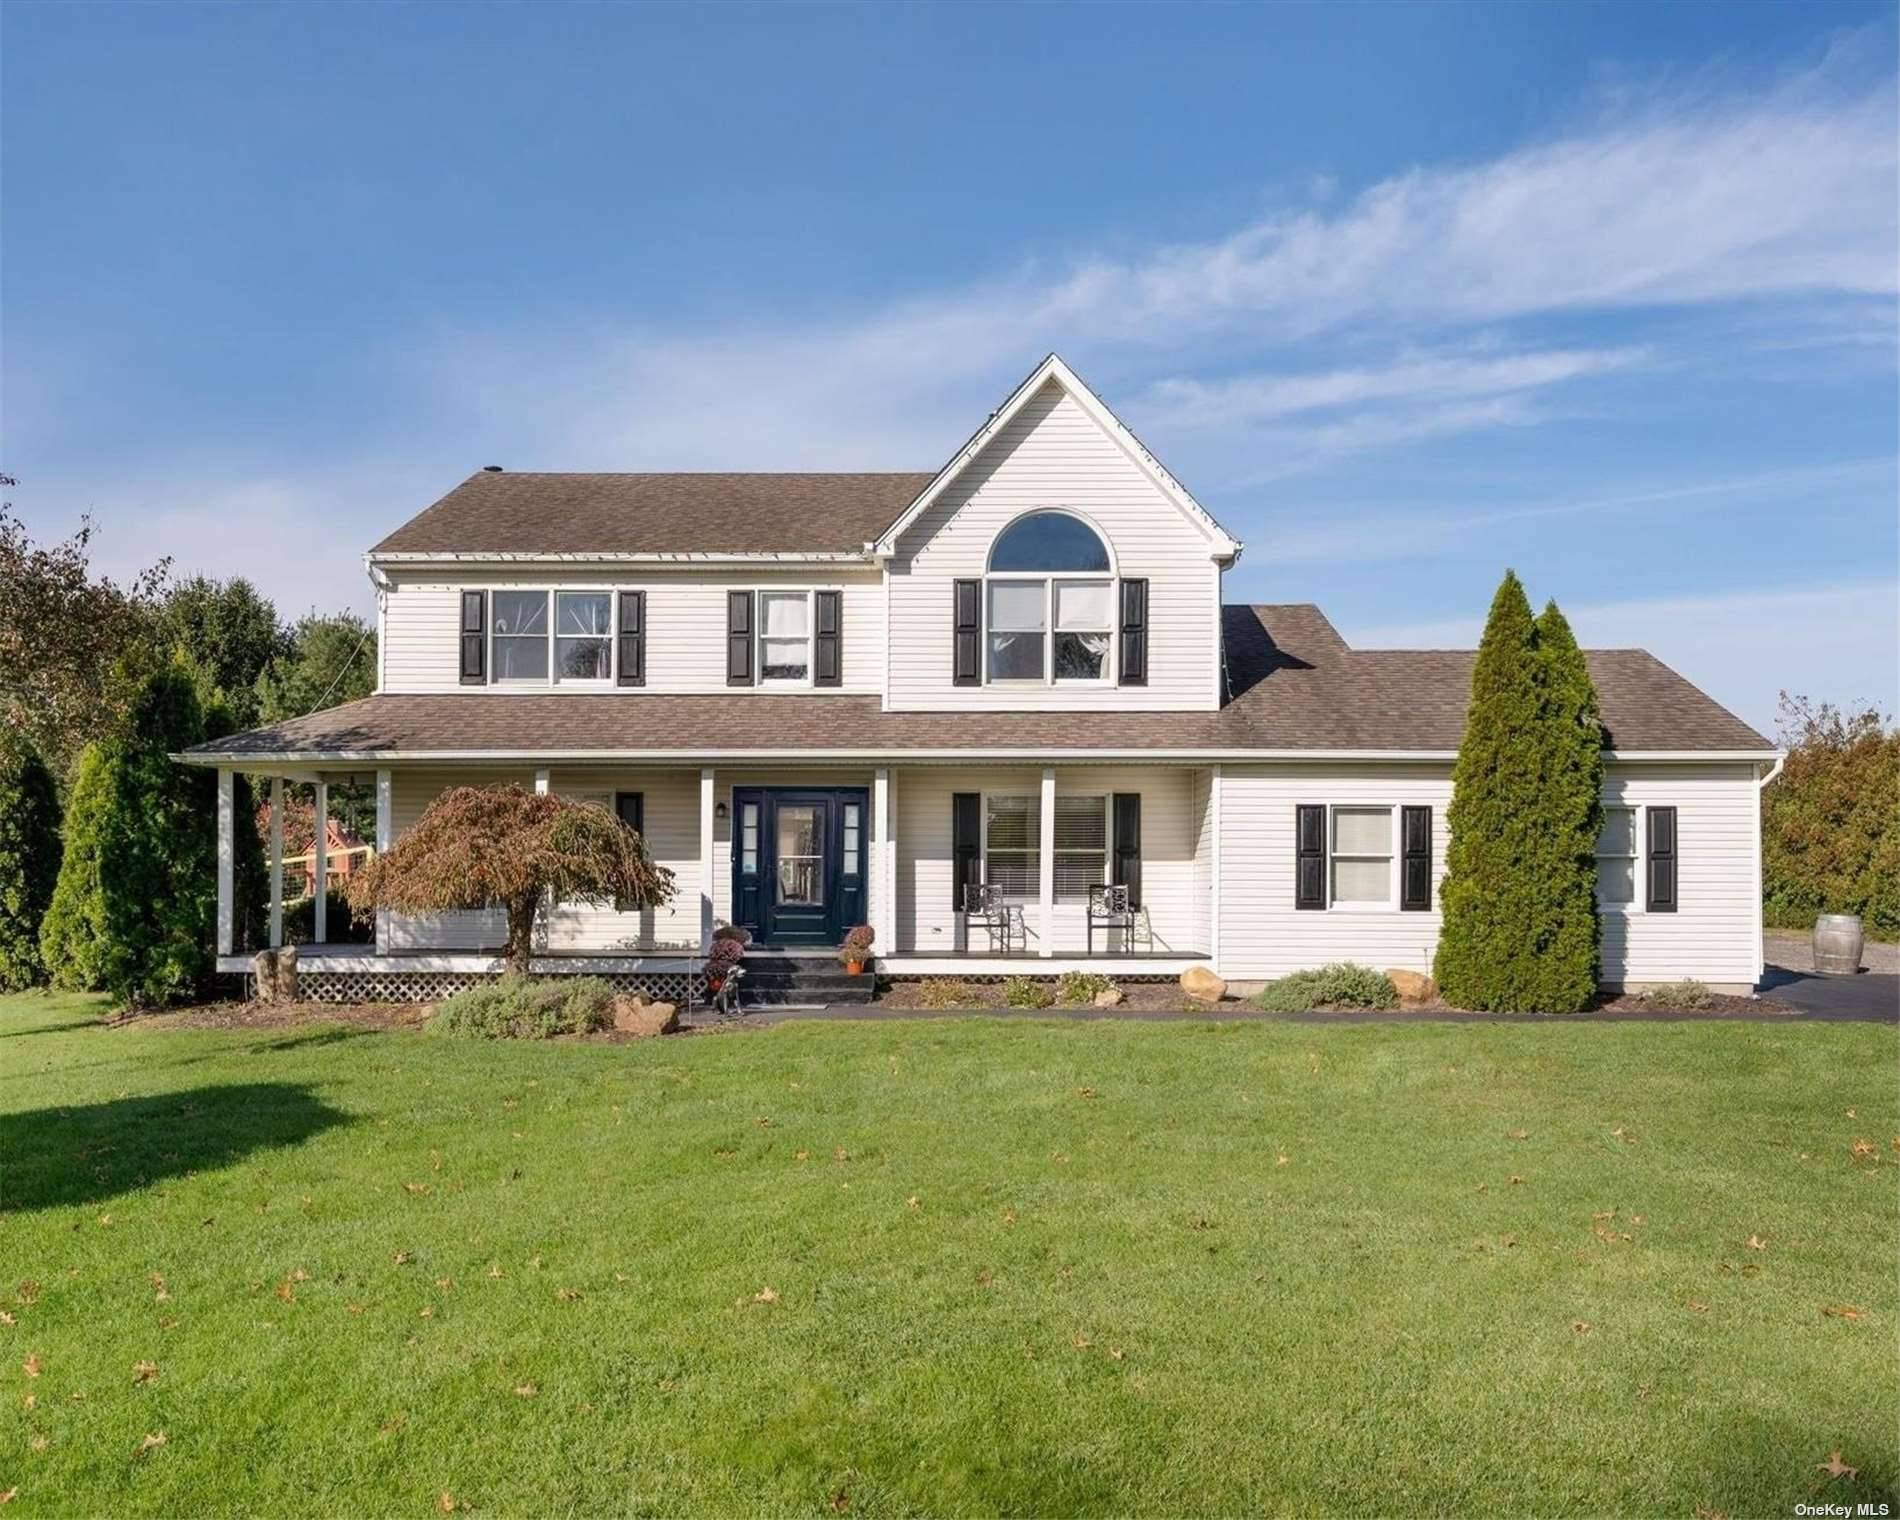 Welcome to this beautiful colonial style home that sits on 1.